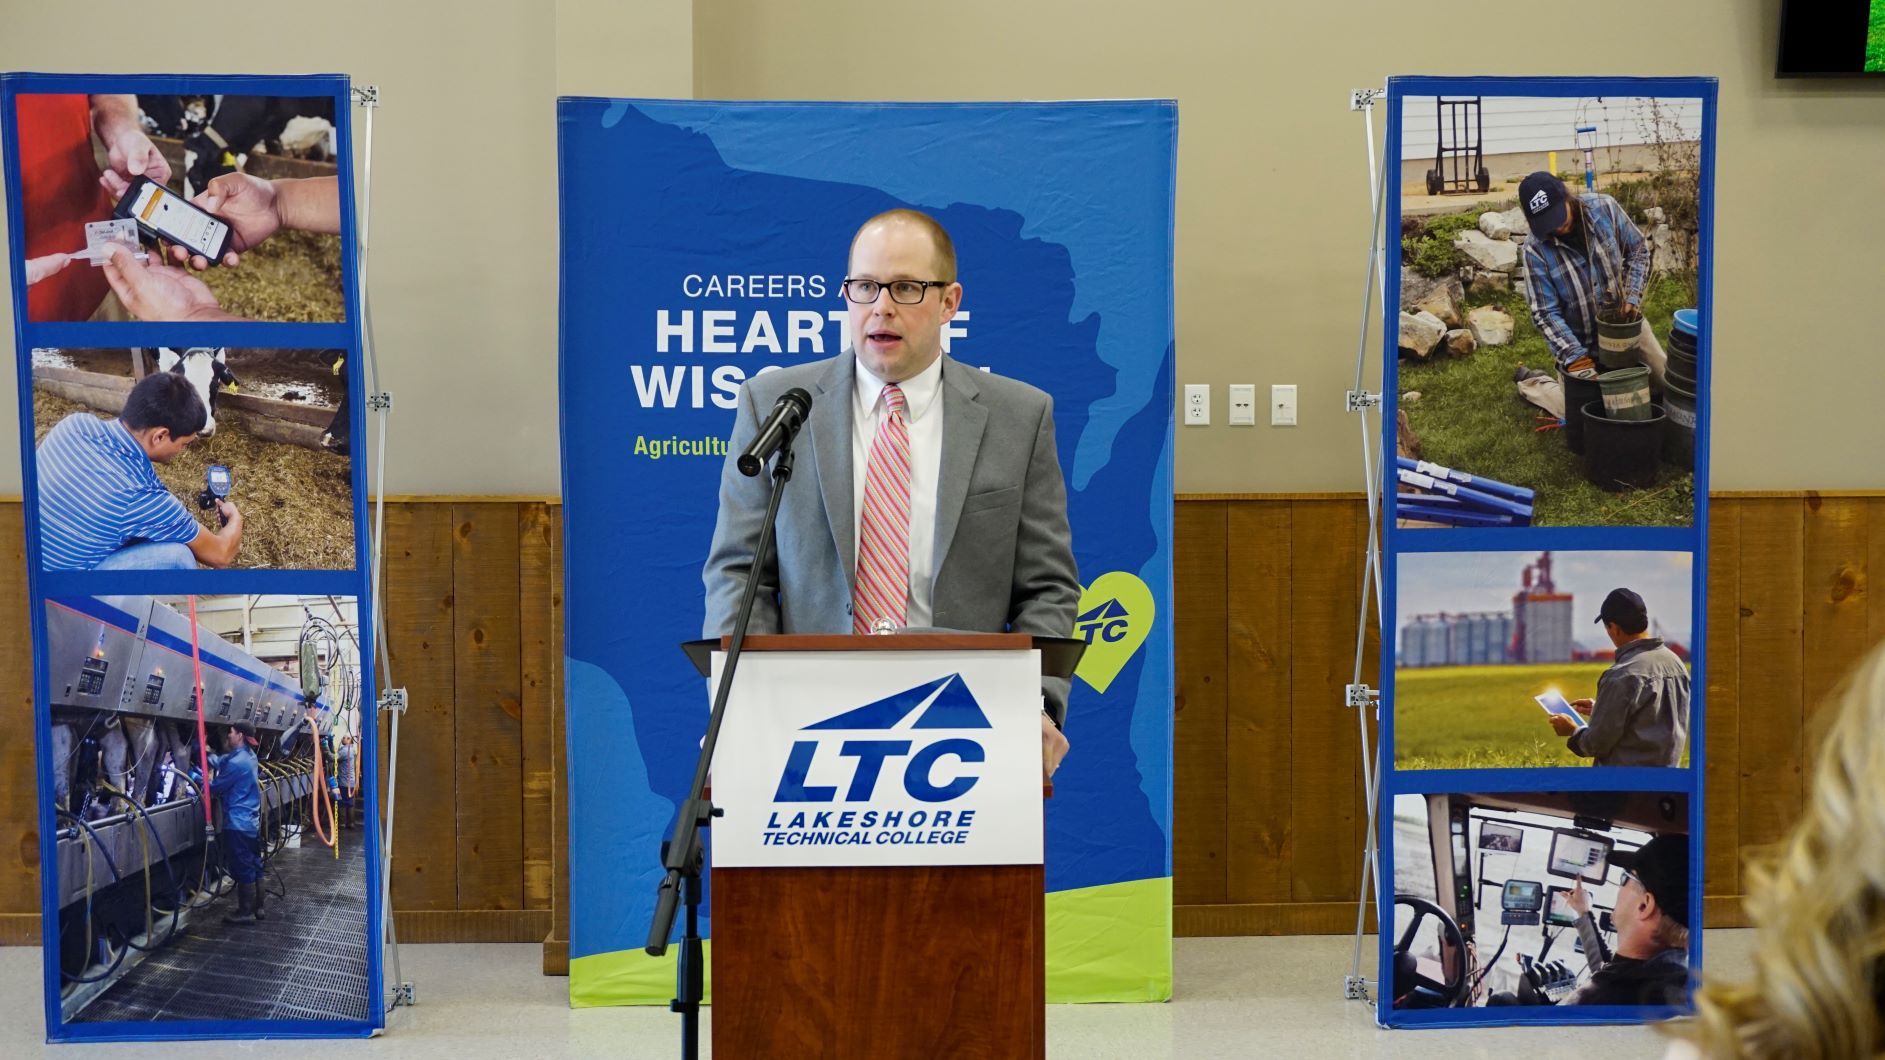 LTC President Dr. Paul Carlsen addressed the importance of the college’s agriculture programs, and the importance of the industry locally and nationally.